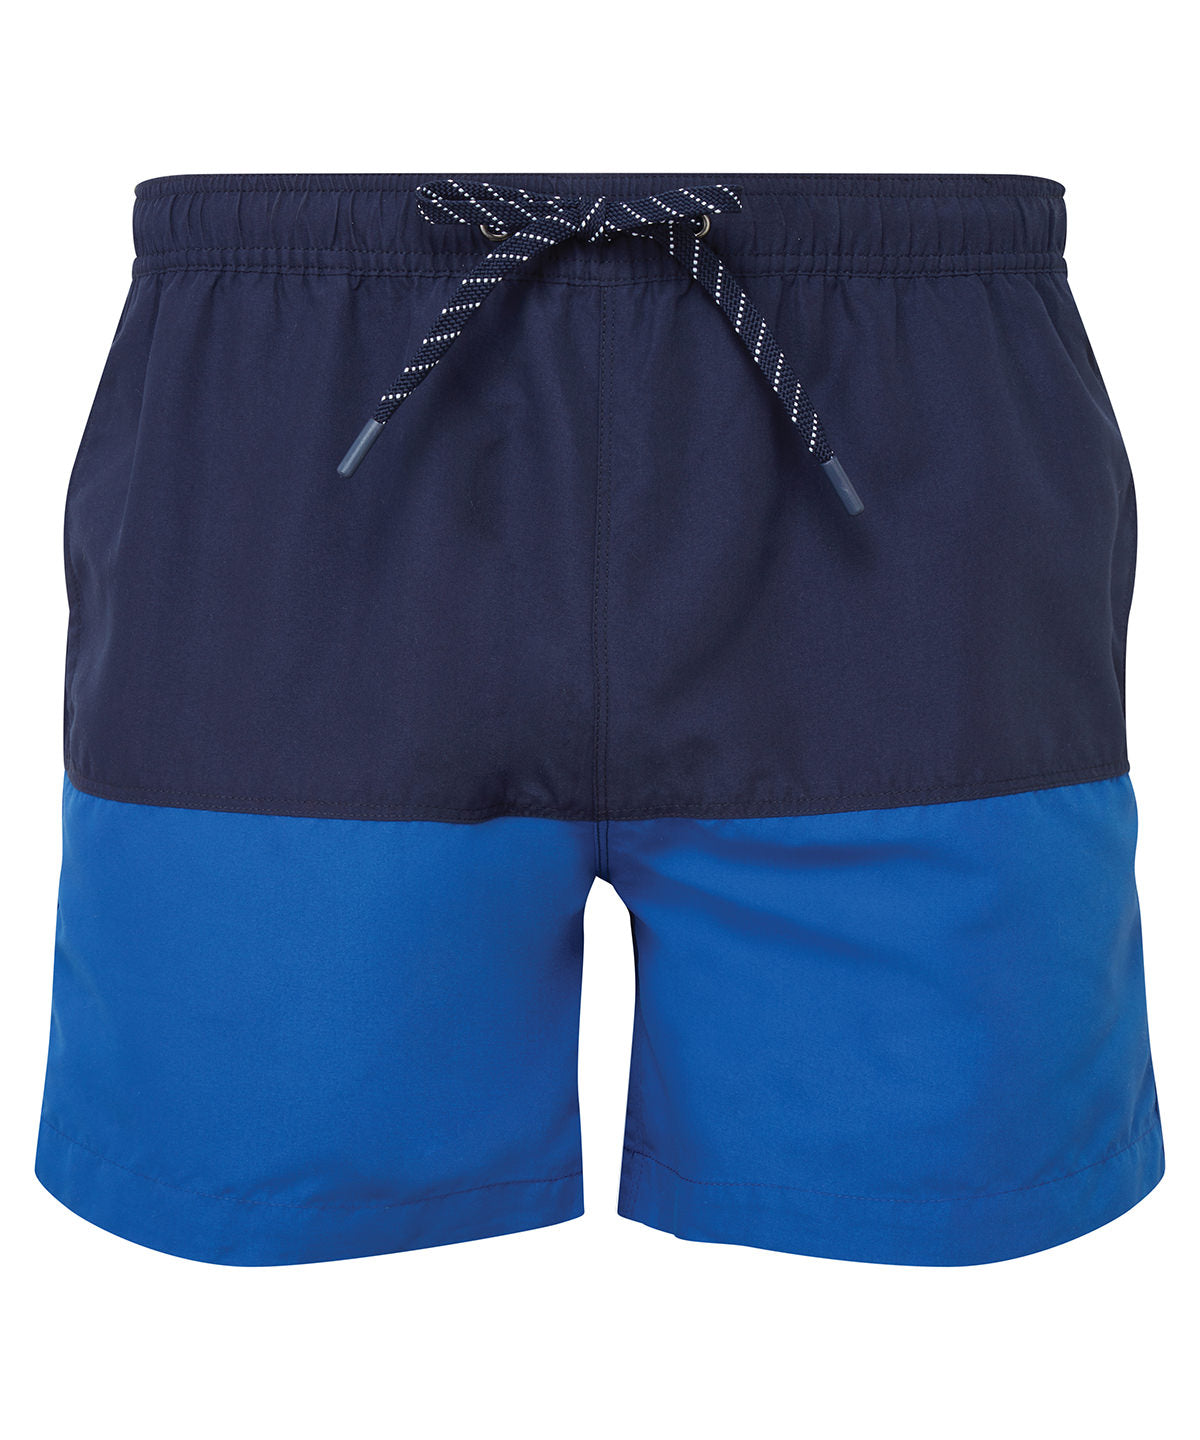 Asquith & Fox AQ056 Block Colour Swim Shorts water-based exercises 100% Polyester workwear - COOZO